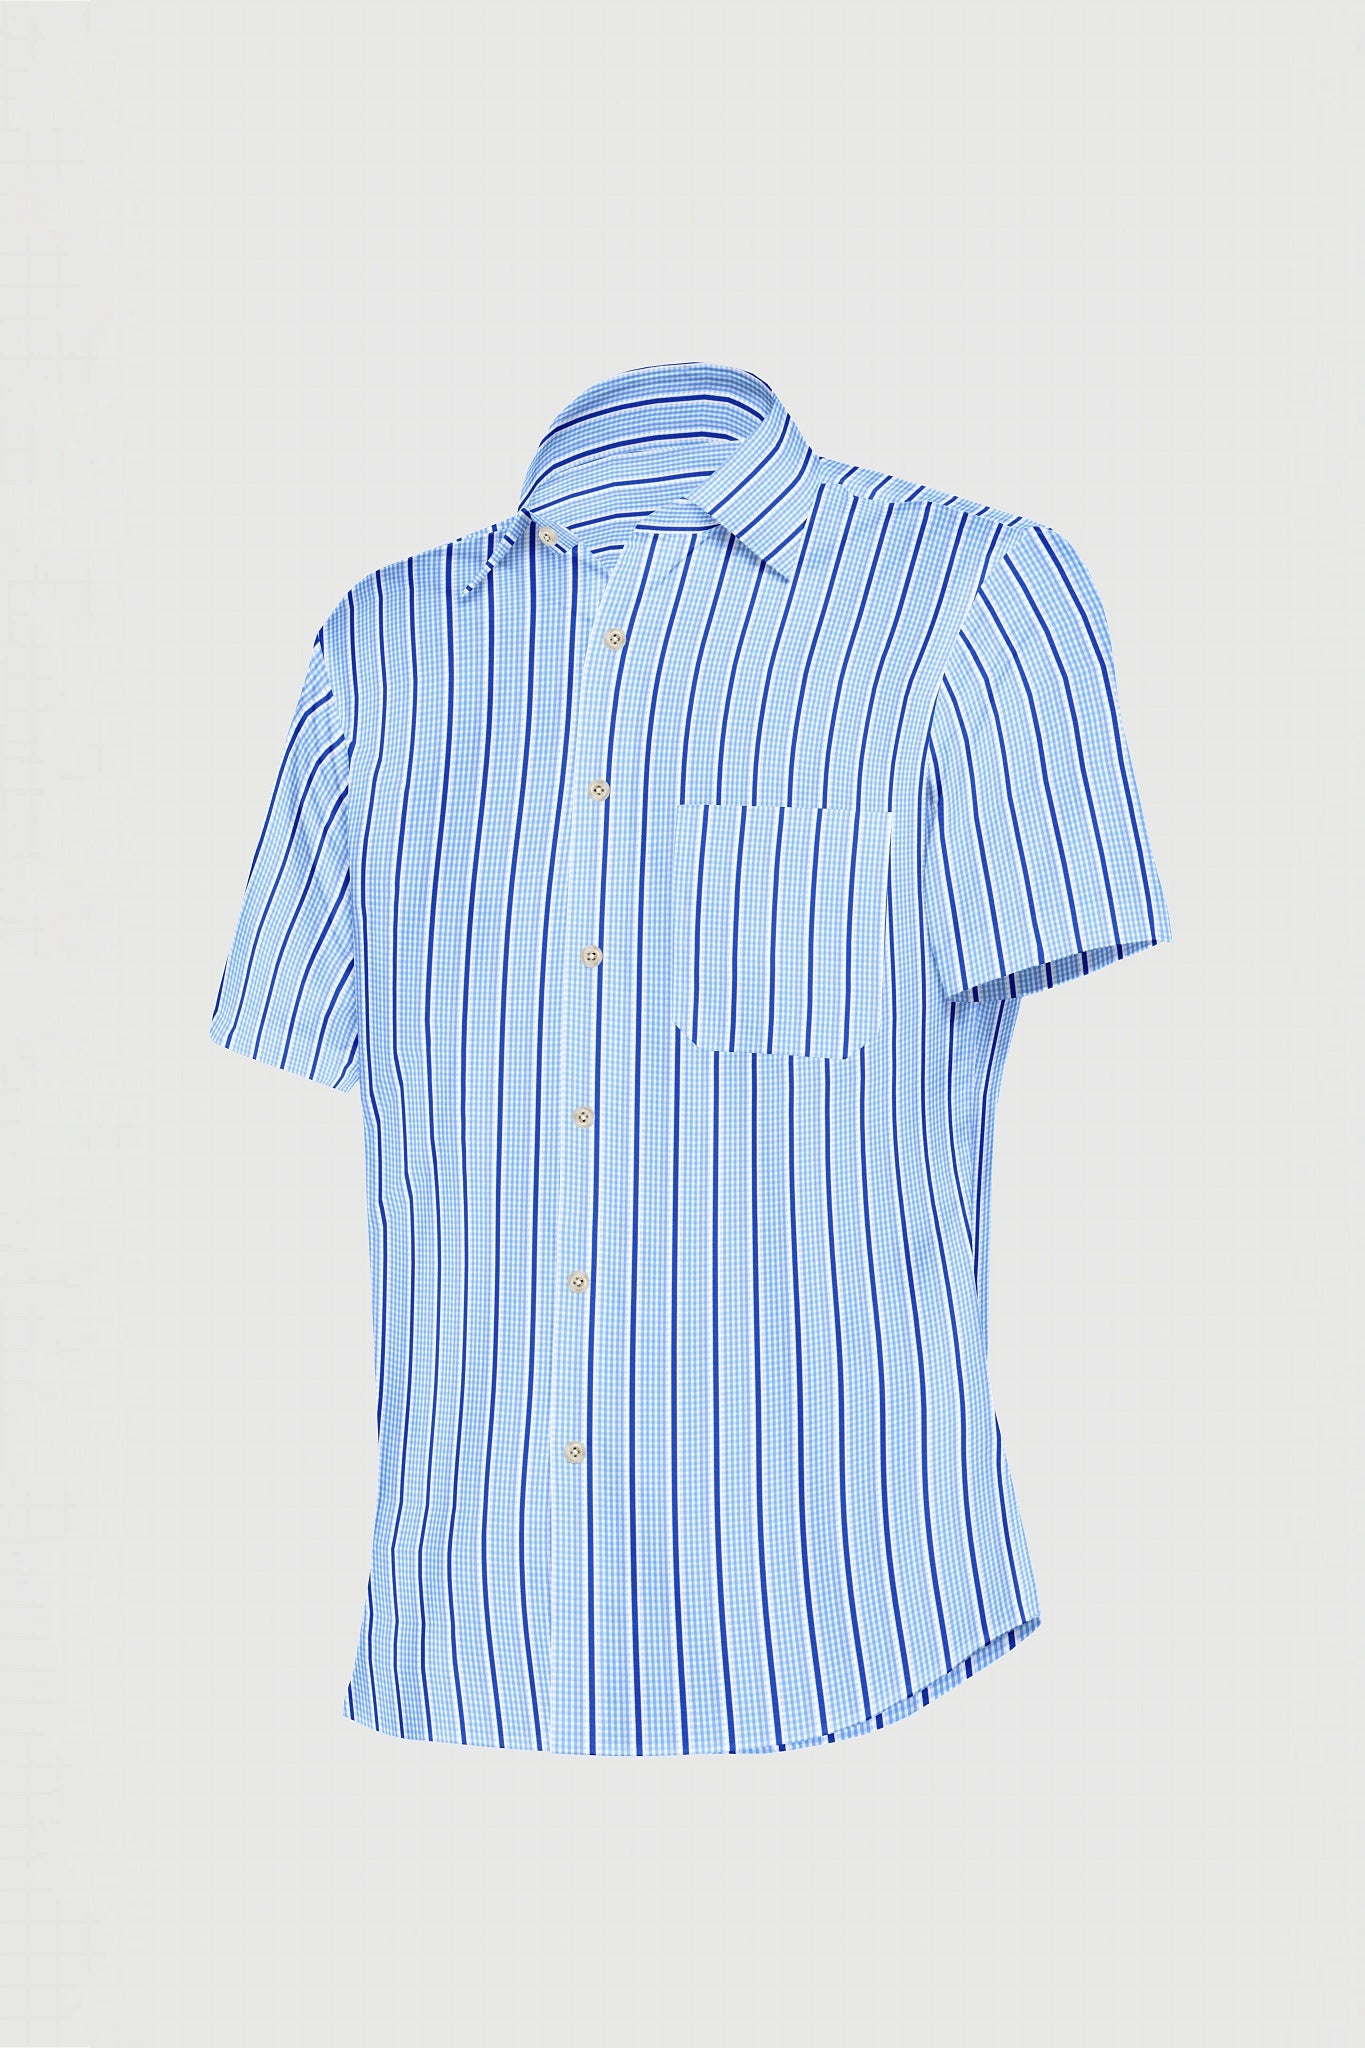 White with Cerulean Blue and Cobalt Blue Wide Chalk Stripes and Checks Cotton Shirt